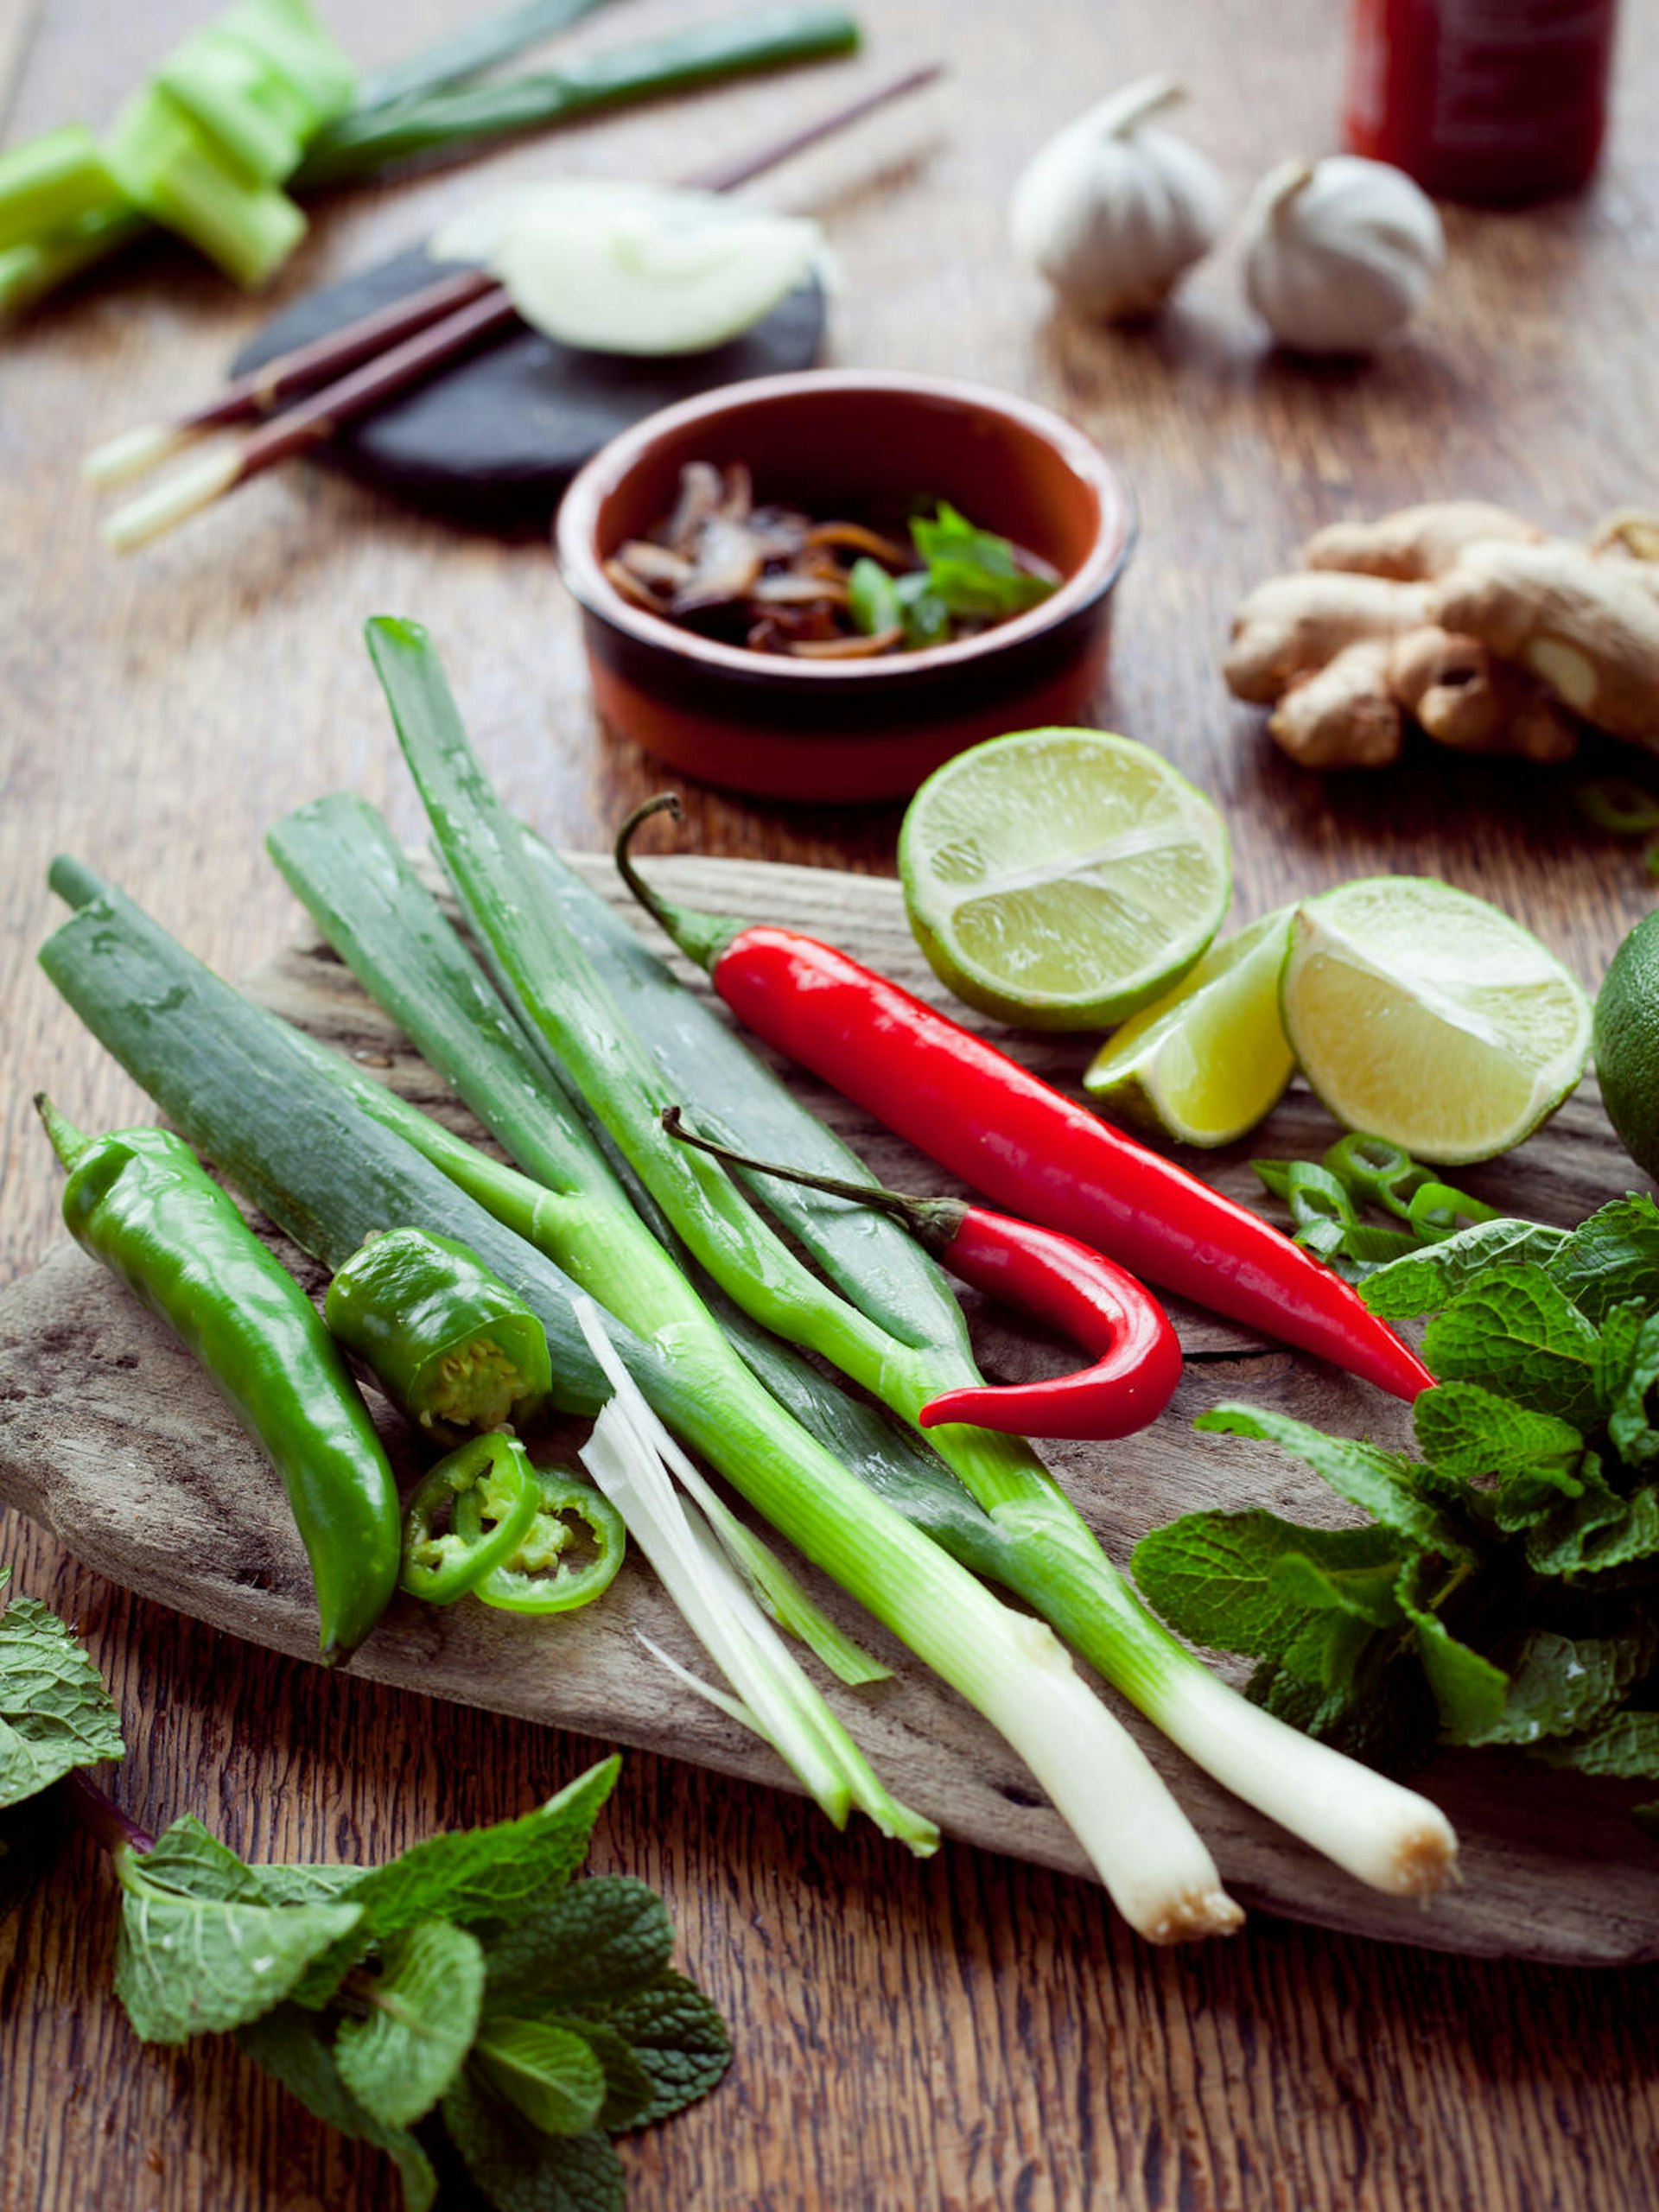 A board with spring onion, ginger, chilli, coriander, garlic and lime arranged ready for cooking © Joanna Tkaczuk / Shutterstock